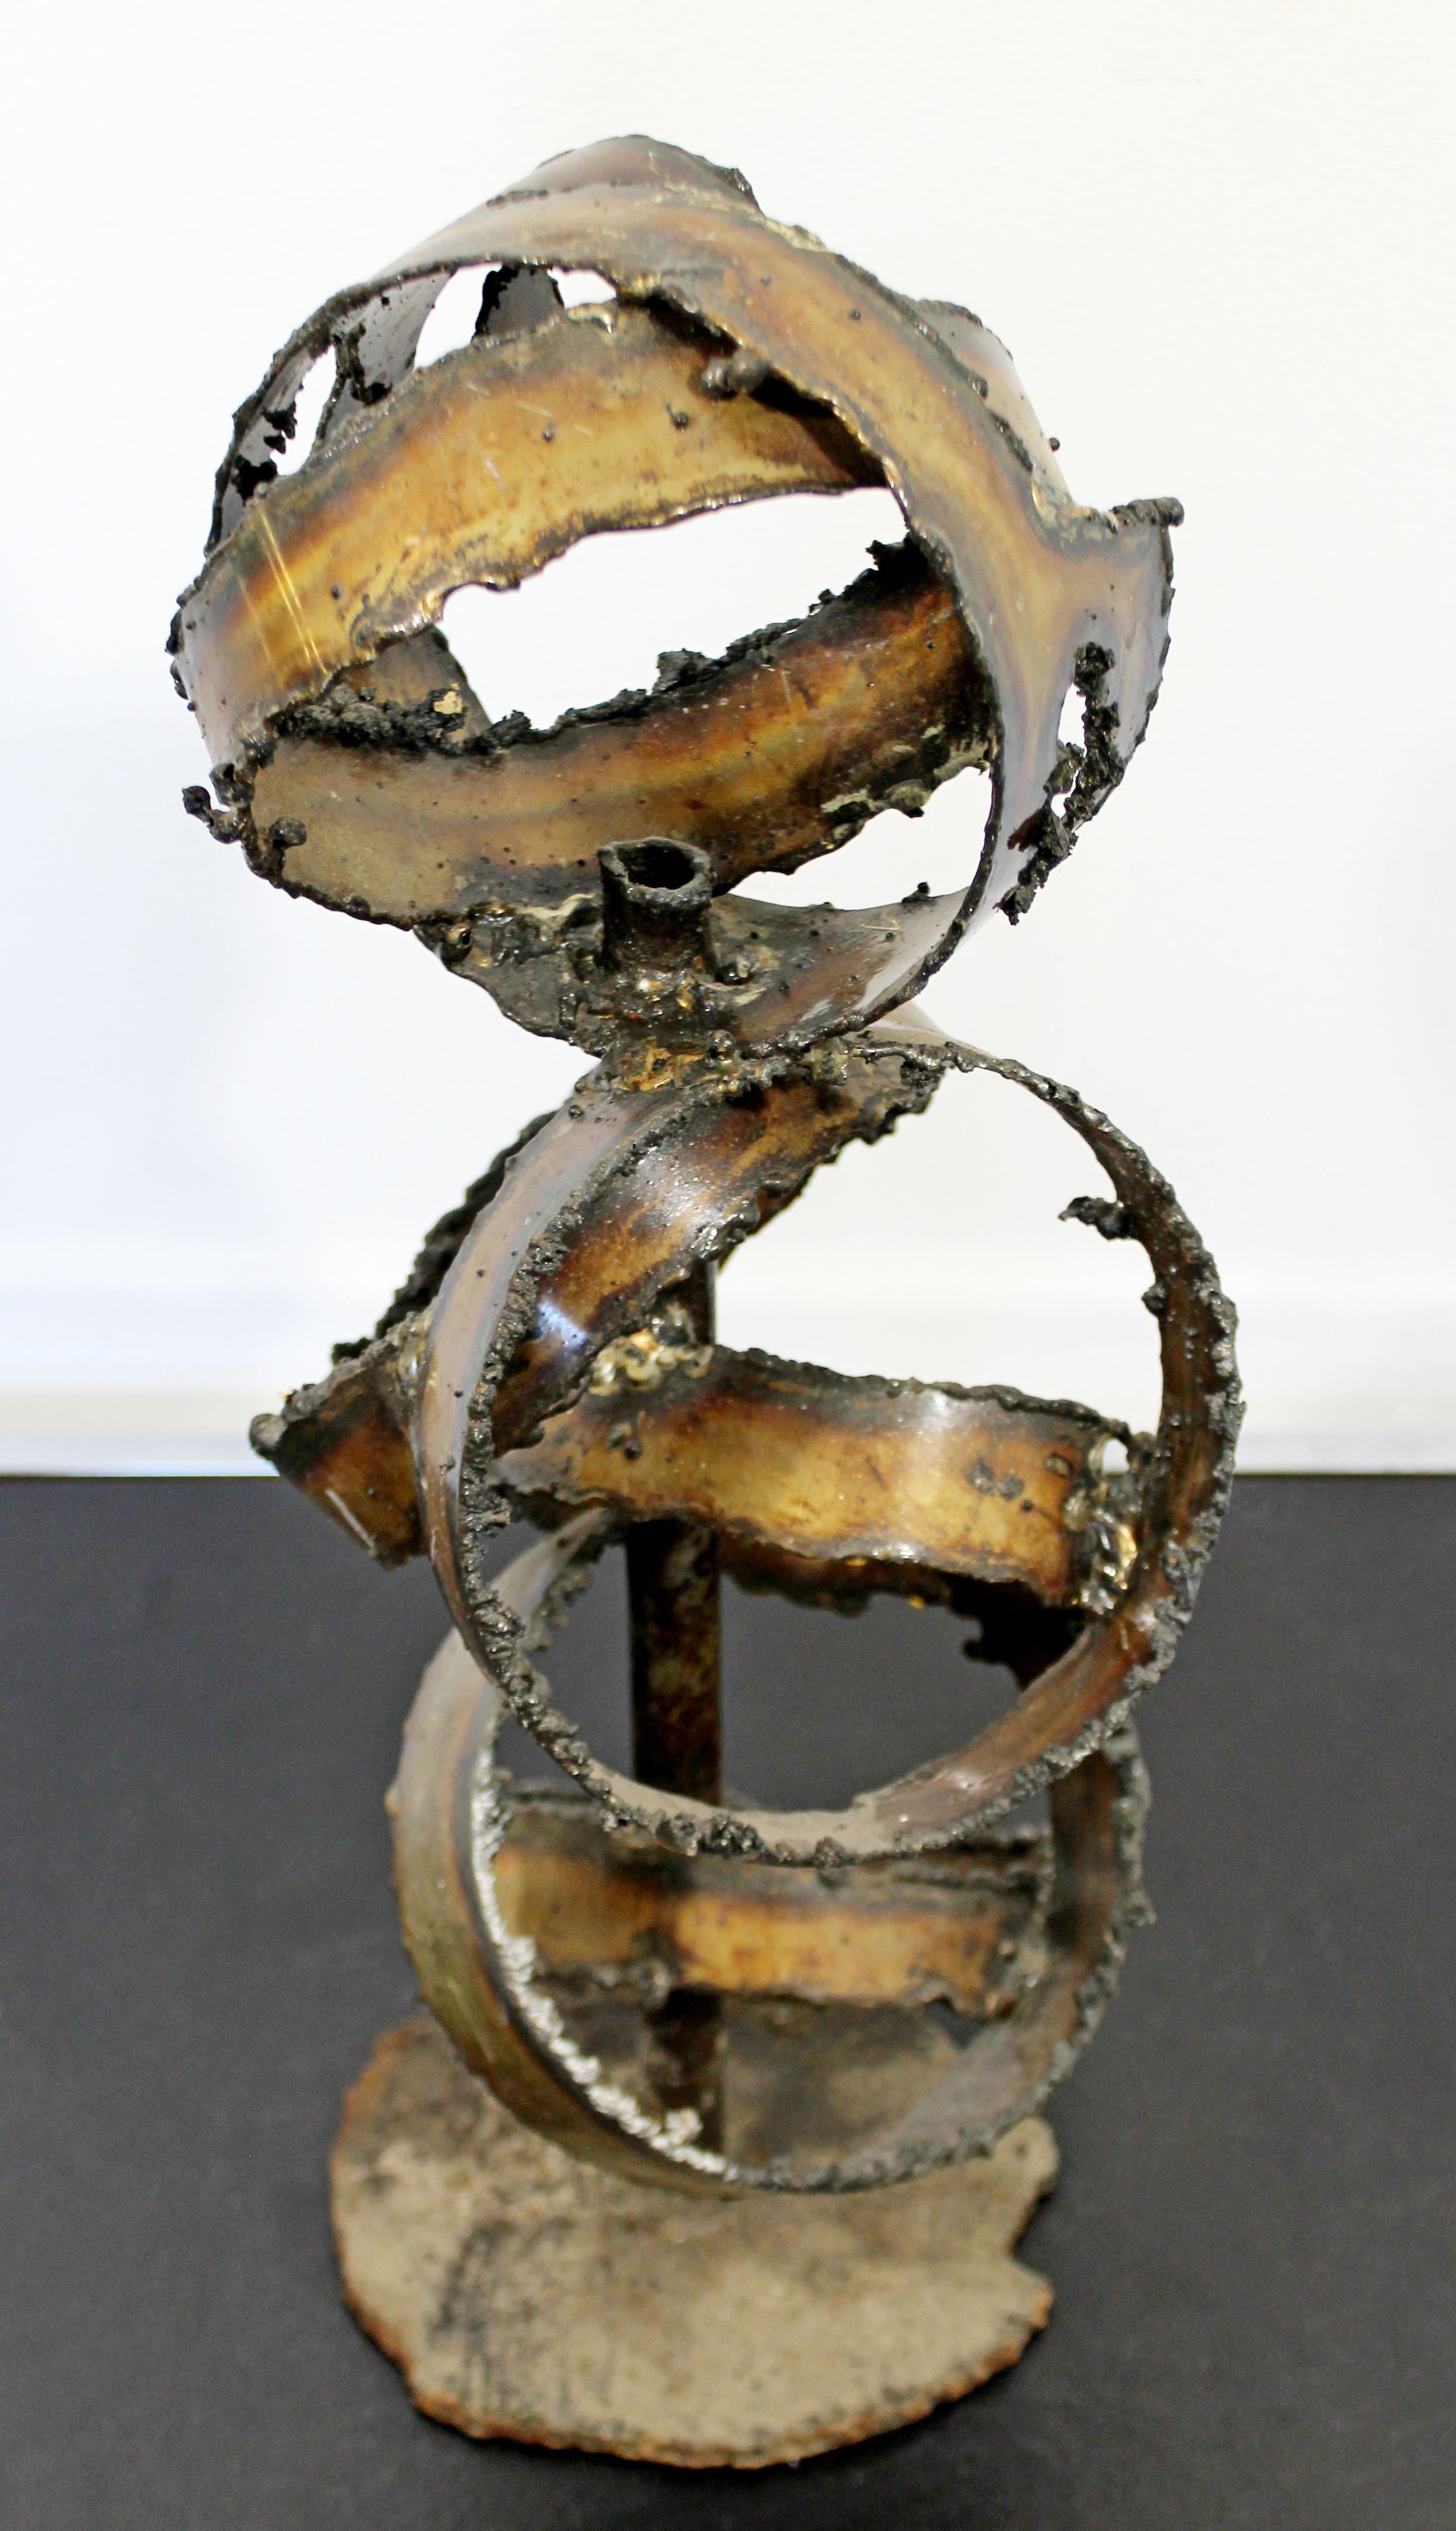 For your consideration is a riveting, Brutalist, abstract, torched metal art table sculpture, circa 1970s. In excellent condition. The dimensions are 8